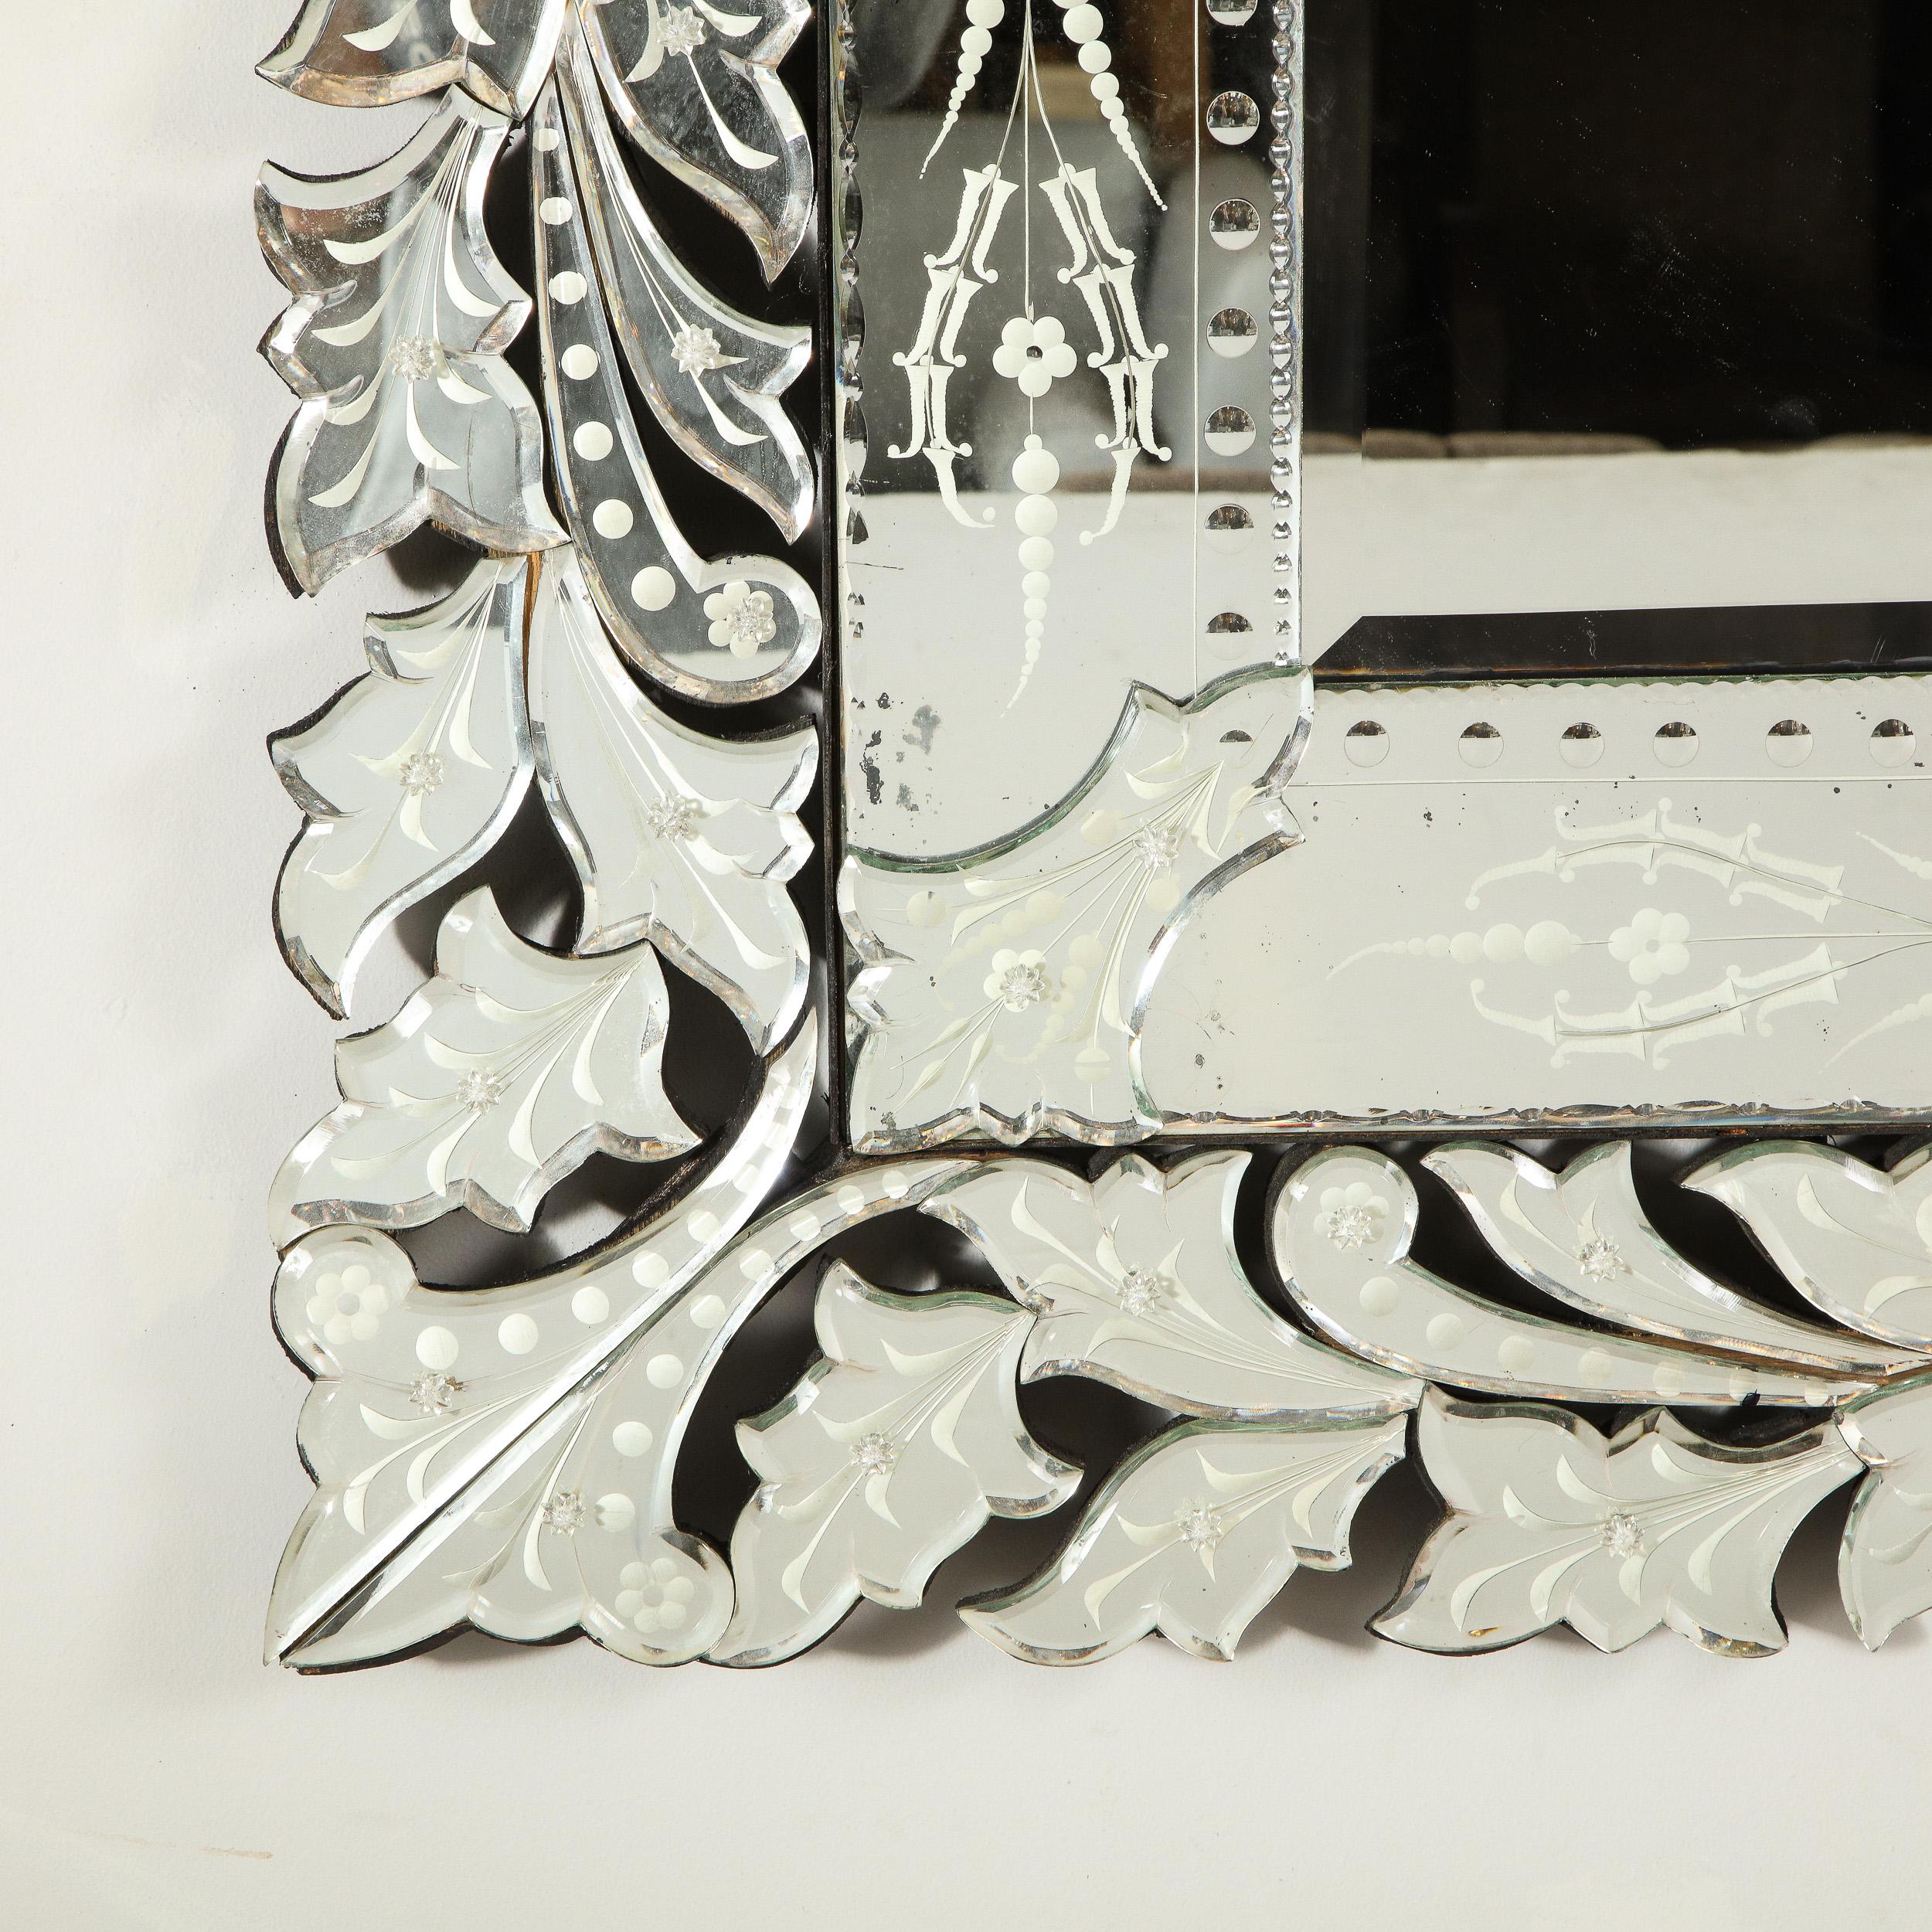 This stunning Art Deco mirror was realized in Italy, circa 1940. It features chain beveling around the perimeter, and a stylized flame motif consisting of an abundance of abstracted forms cut from mirrored glass emanating from the square center. The